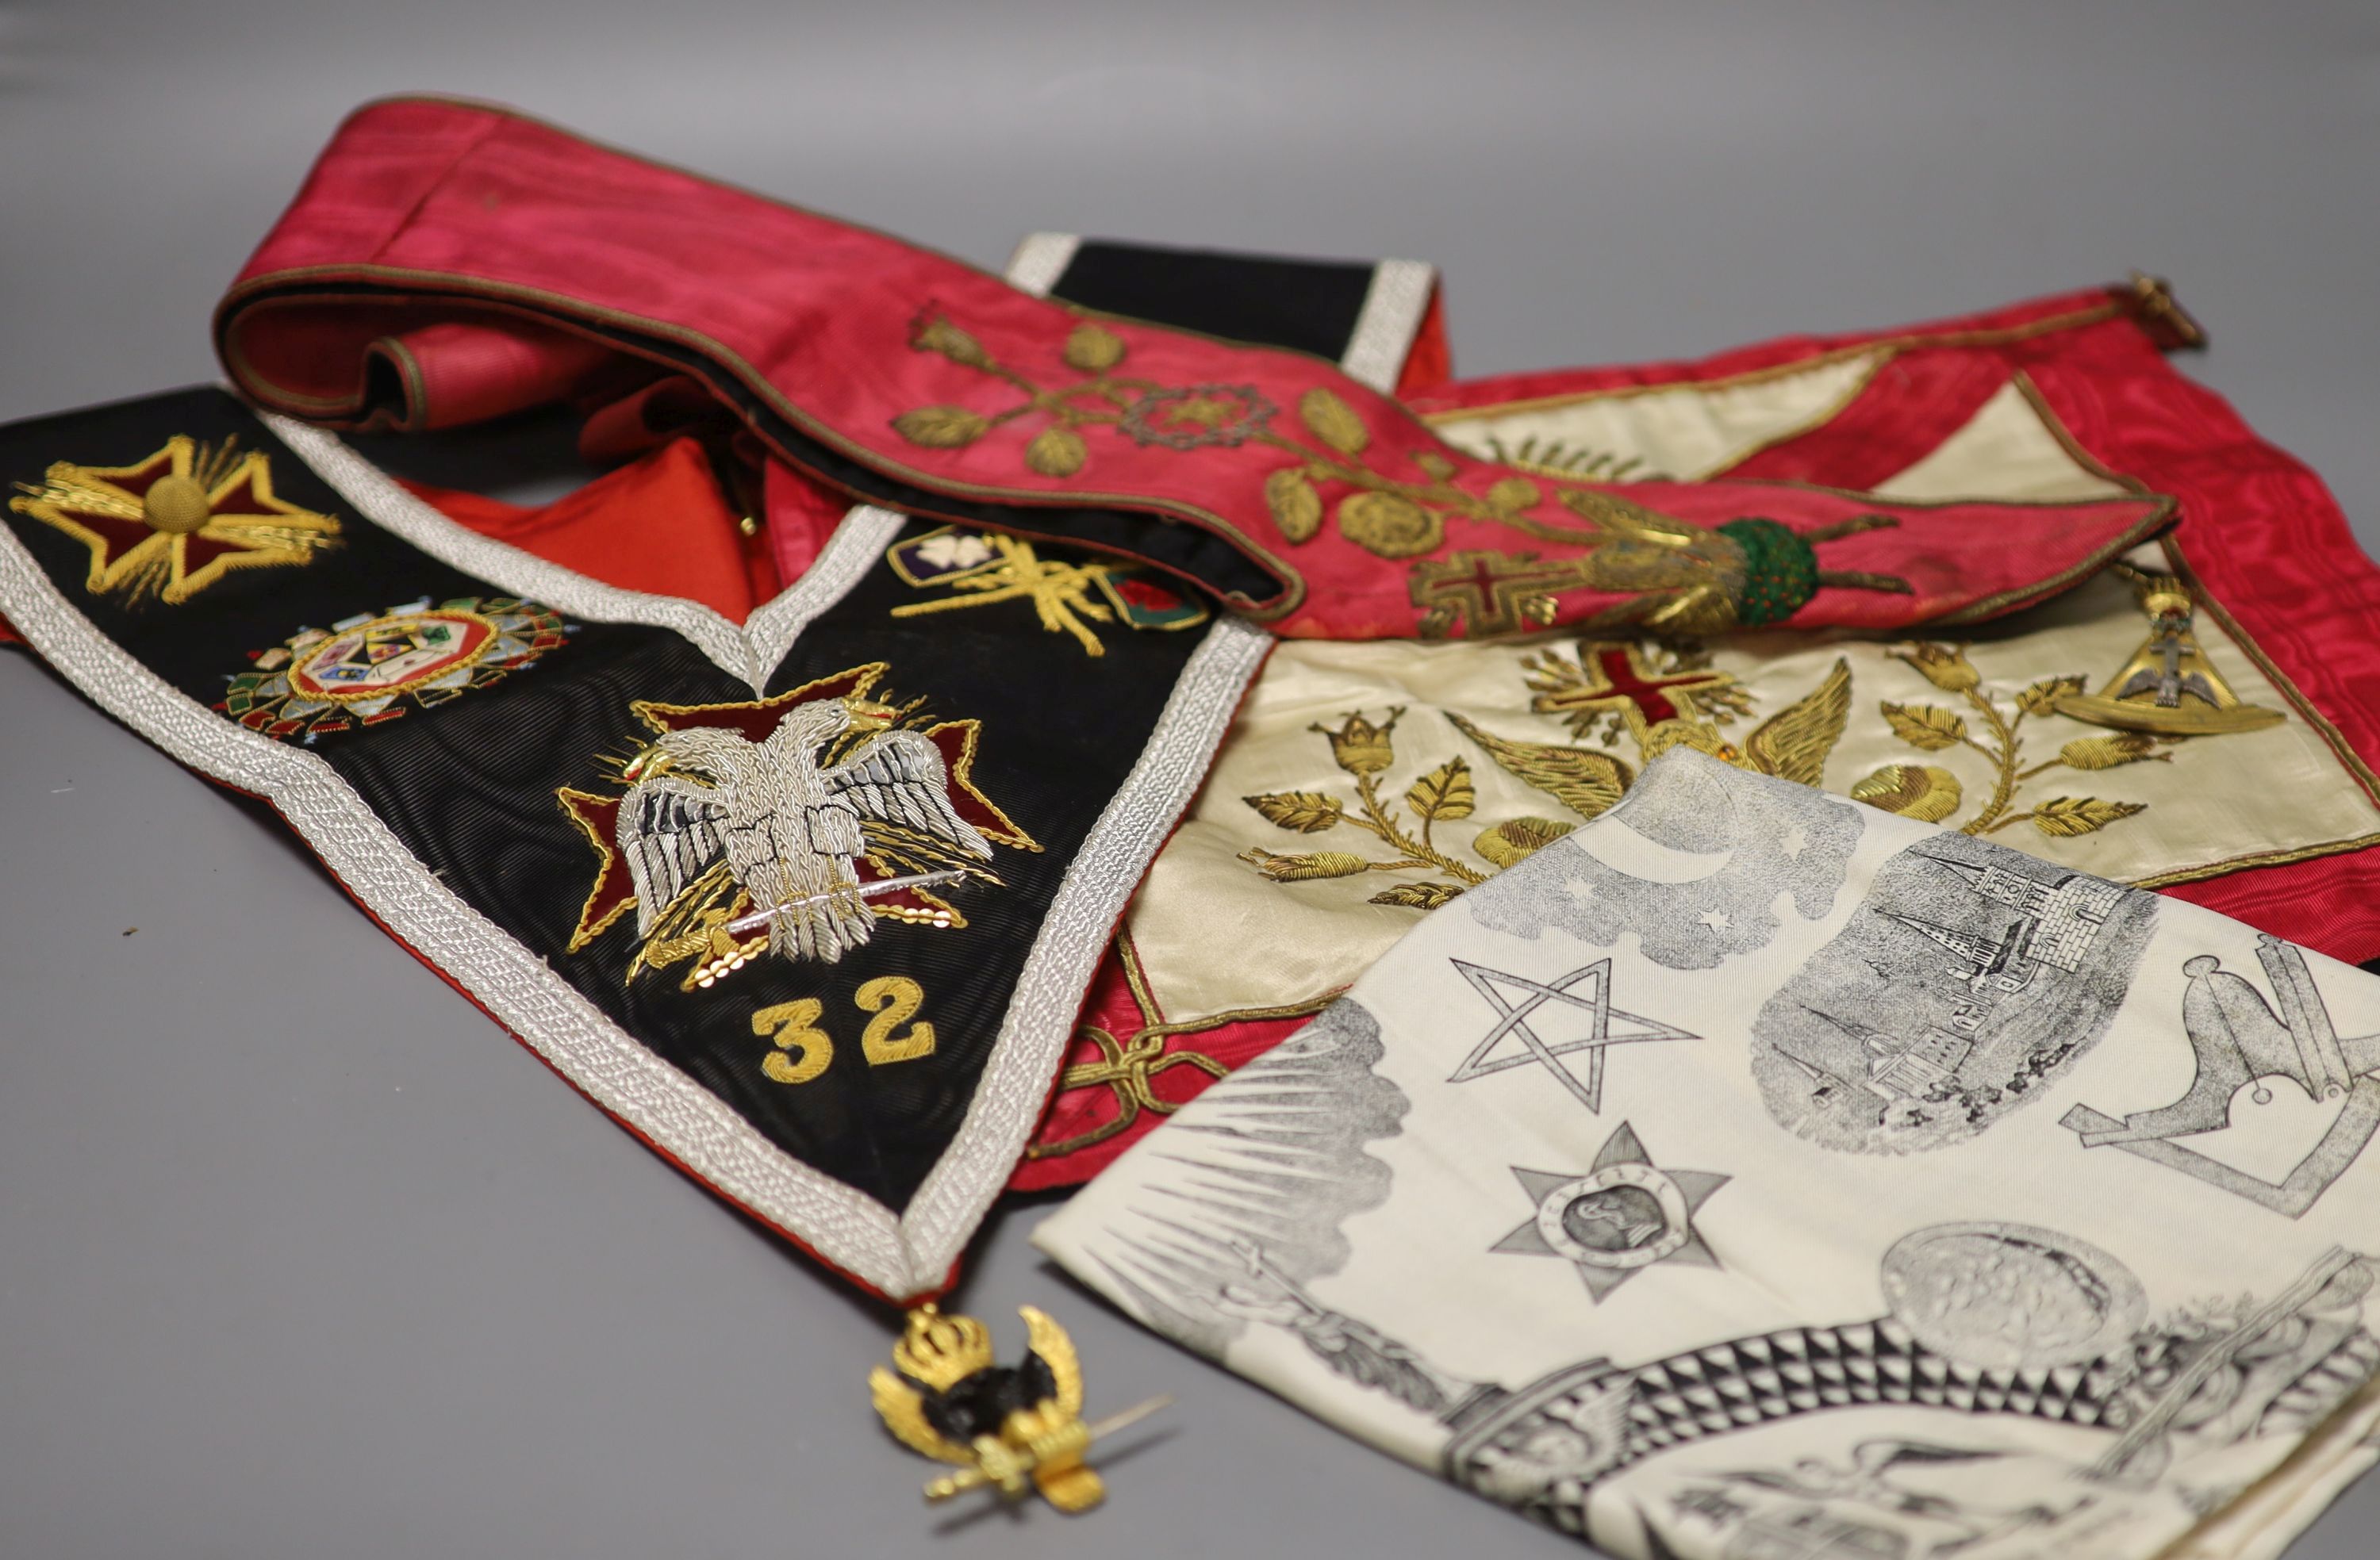 A late 19th early 20th century Masonic bullion worked embroidered and matching sash, plus a modern sash with silver gilt medallion and